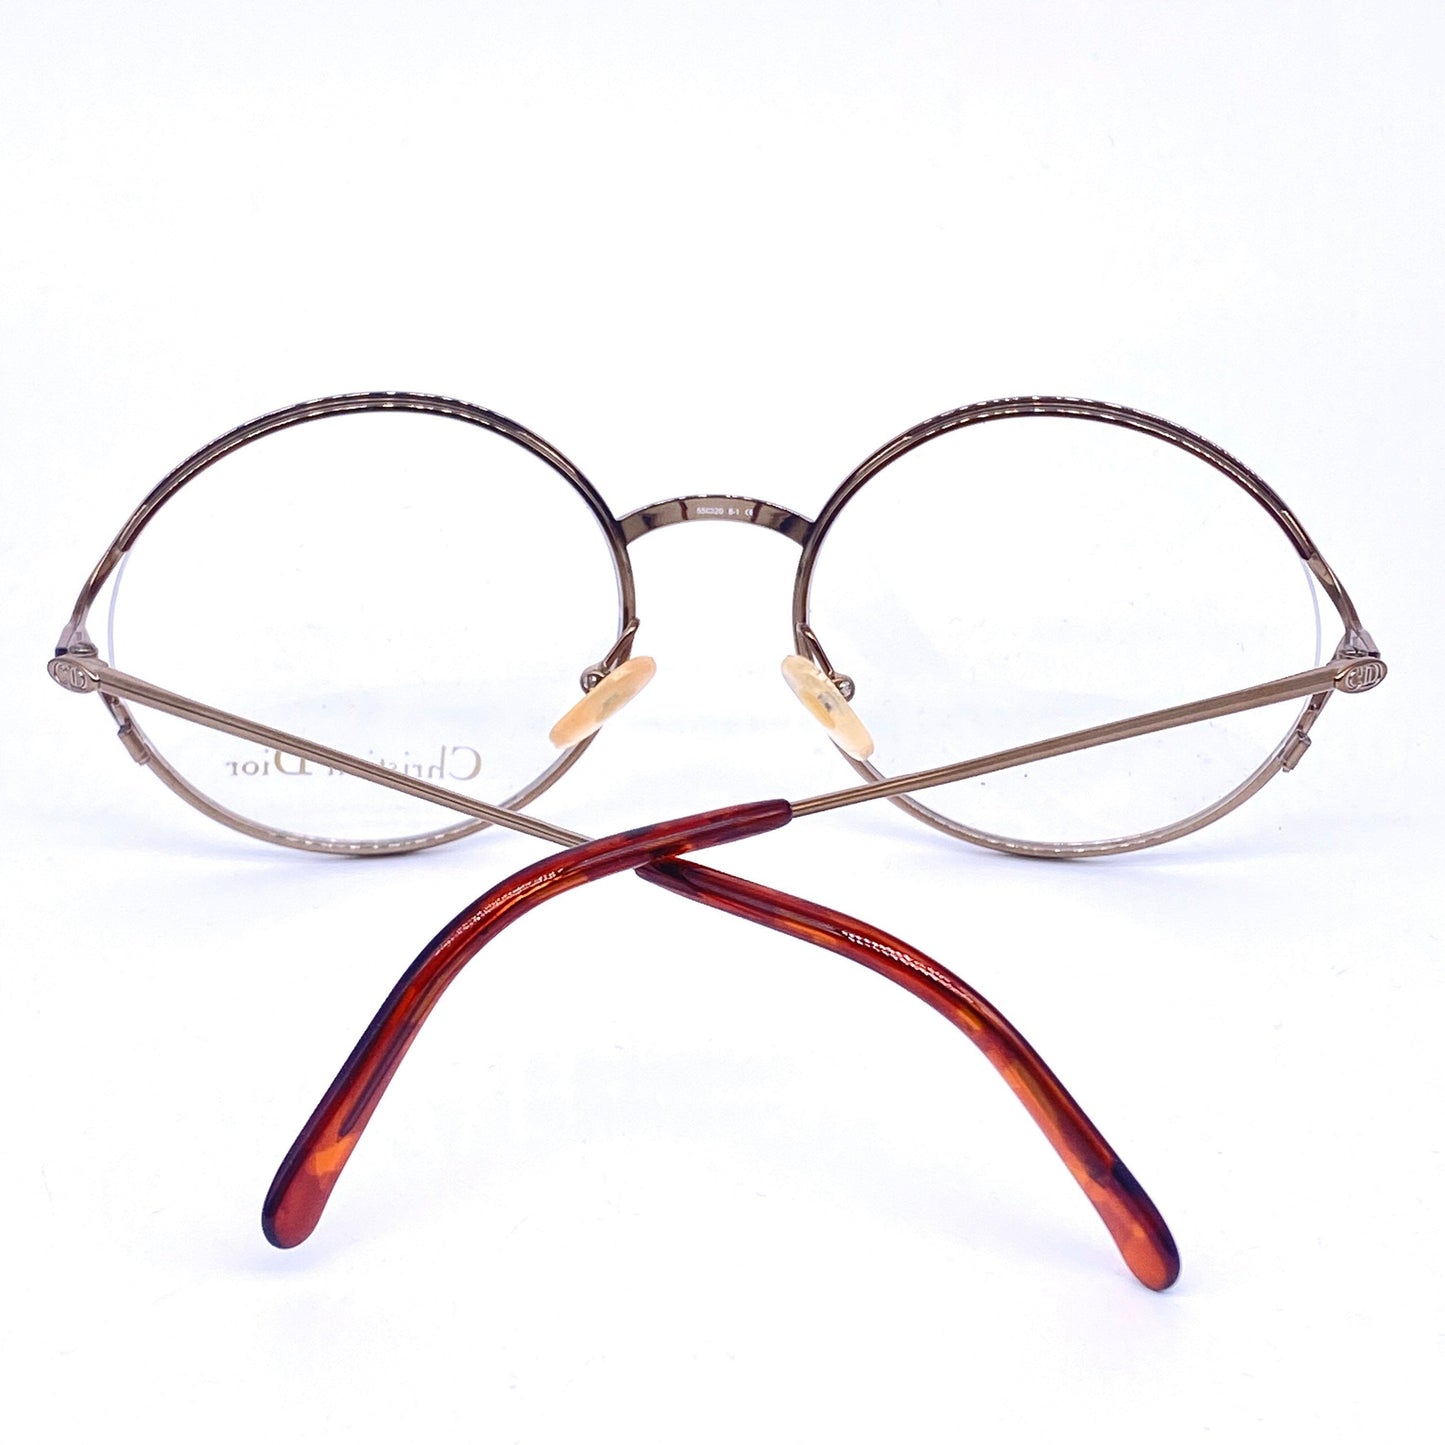 Christian Dior 3500 round oversized eyeglasses frames, coming in yellow or pink gold, no’s 80s Austria